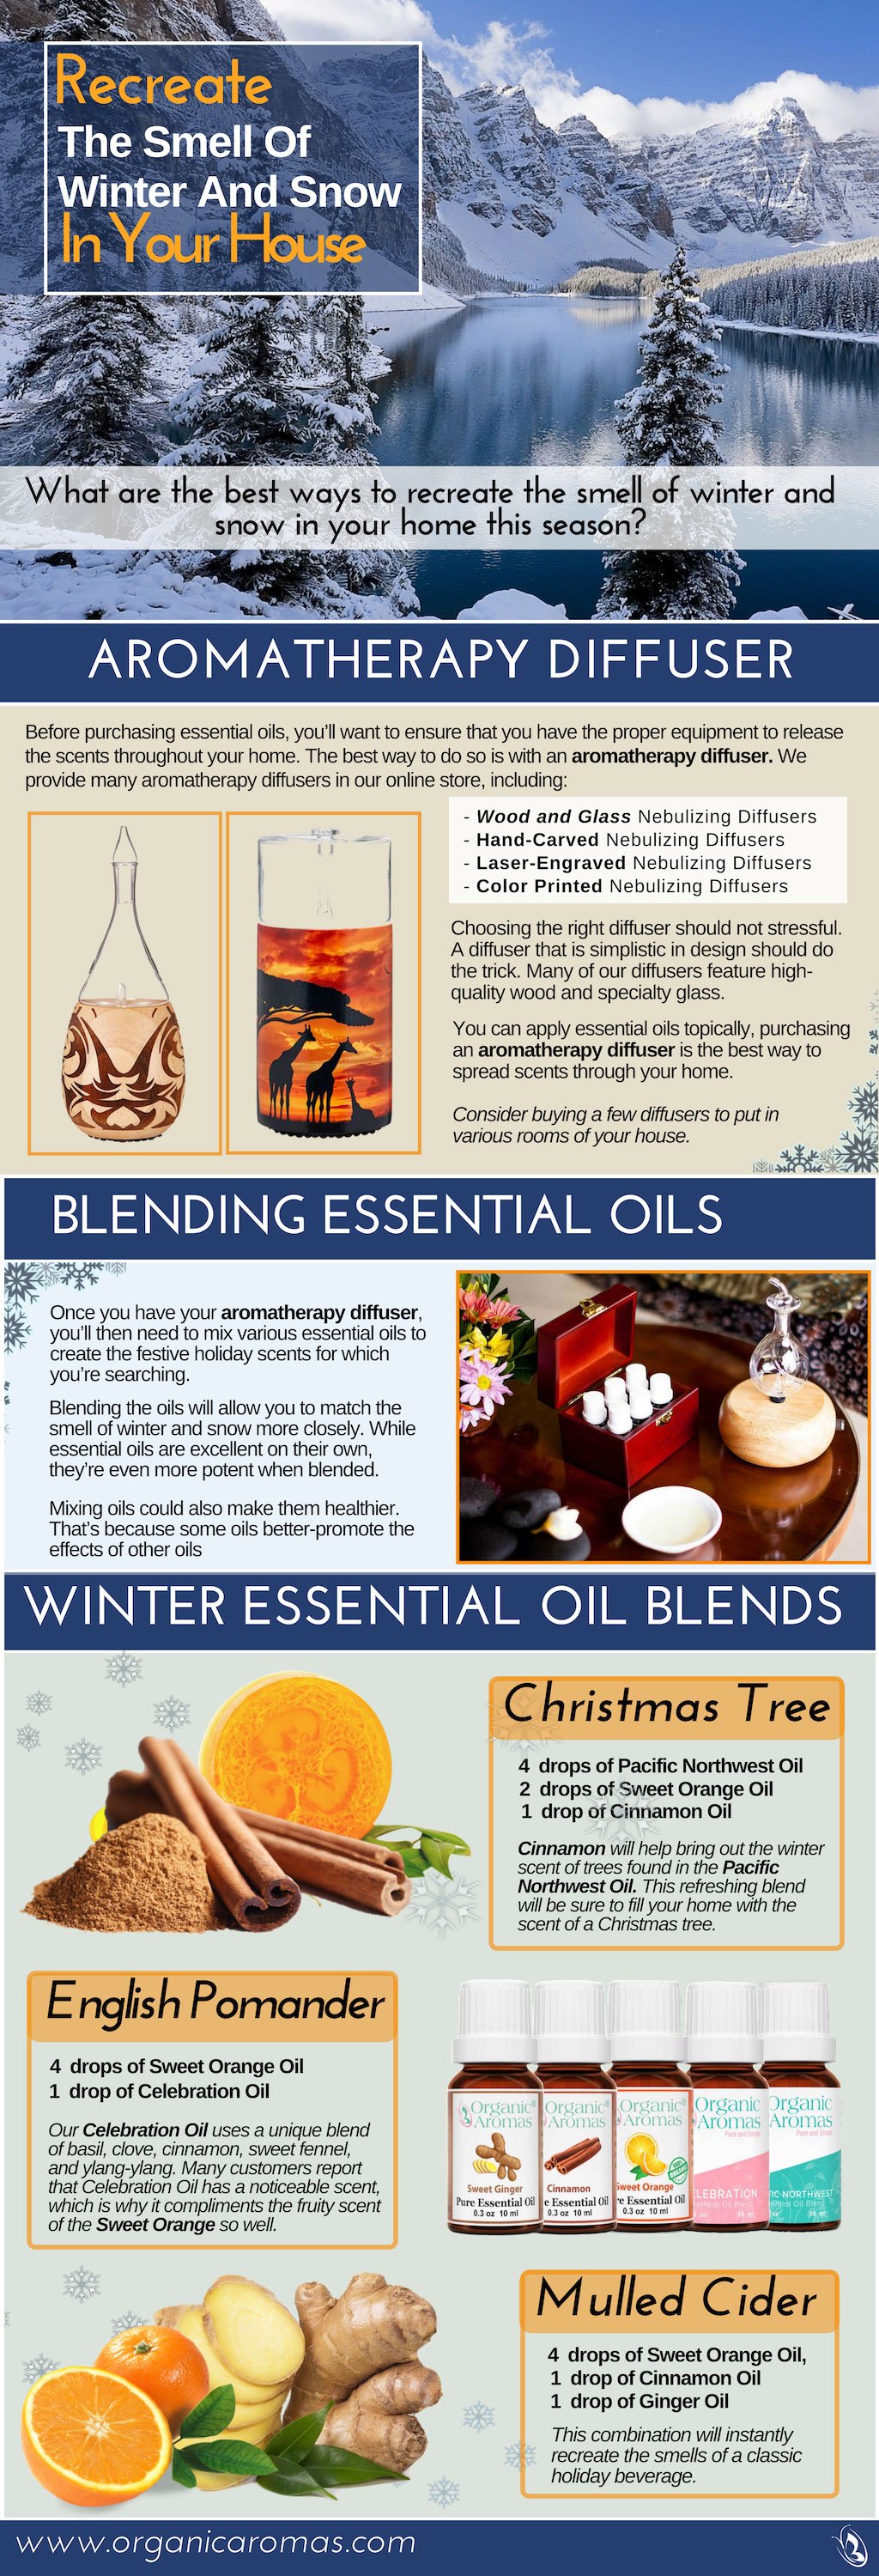 Recreate The Smell Of Winter And Snow In Your House - Organic Aromas®